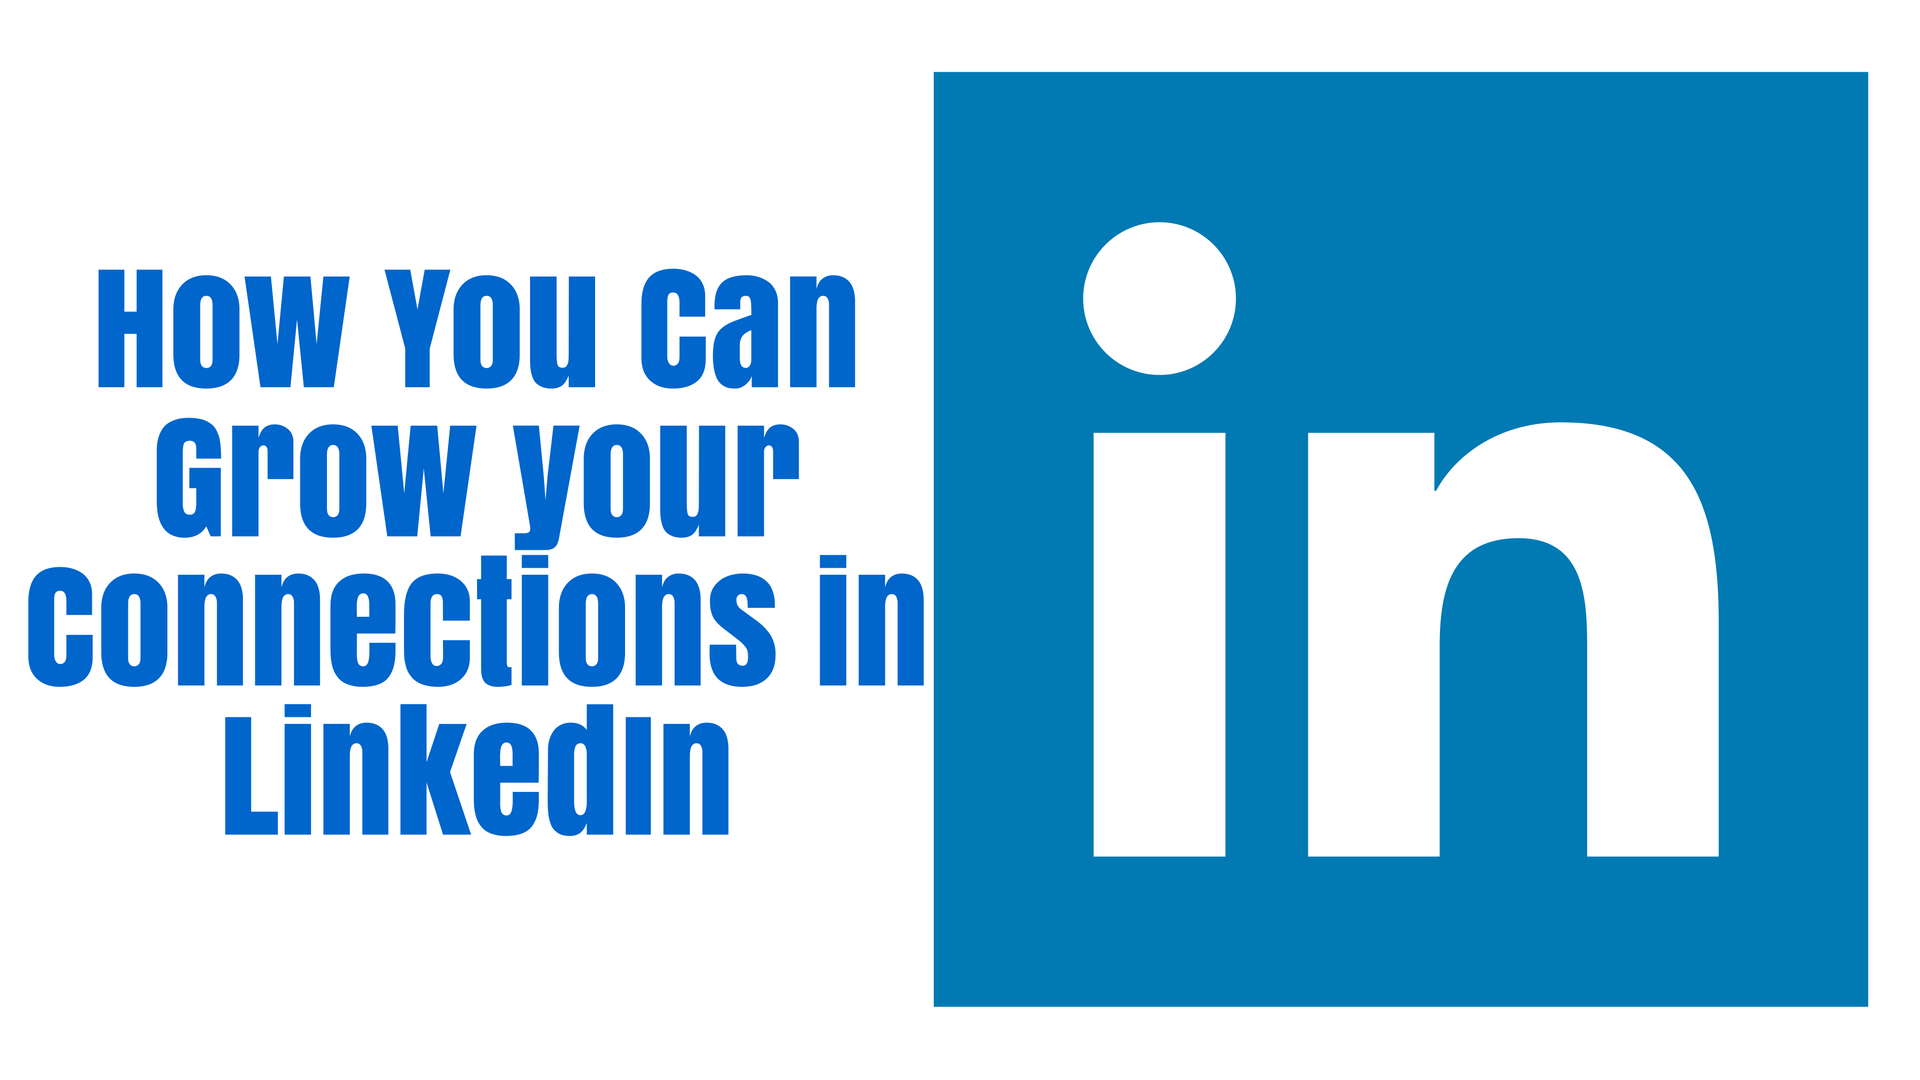 How You Can Grow your Connections in LinkedIn